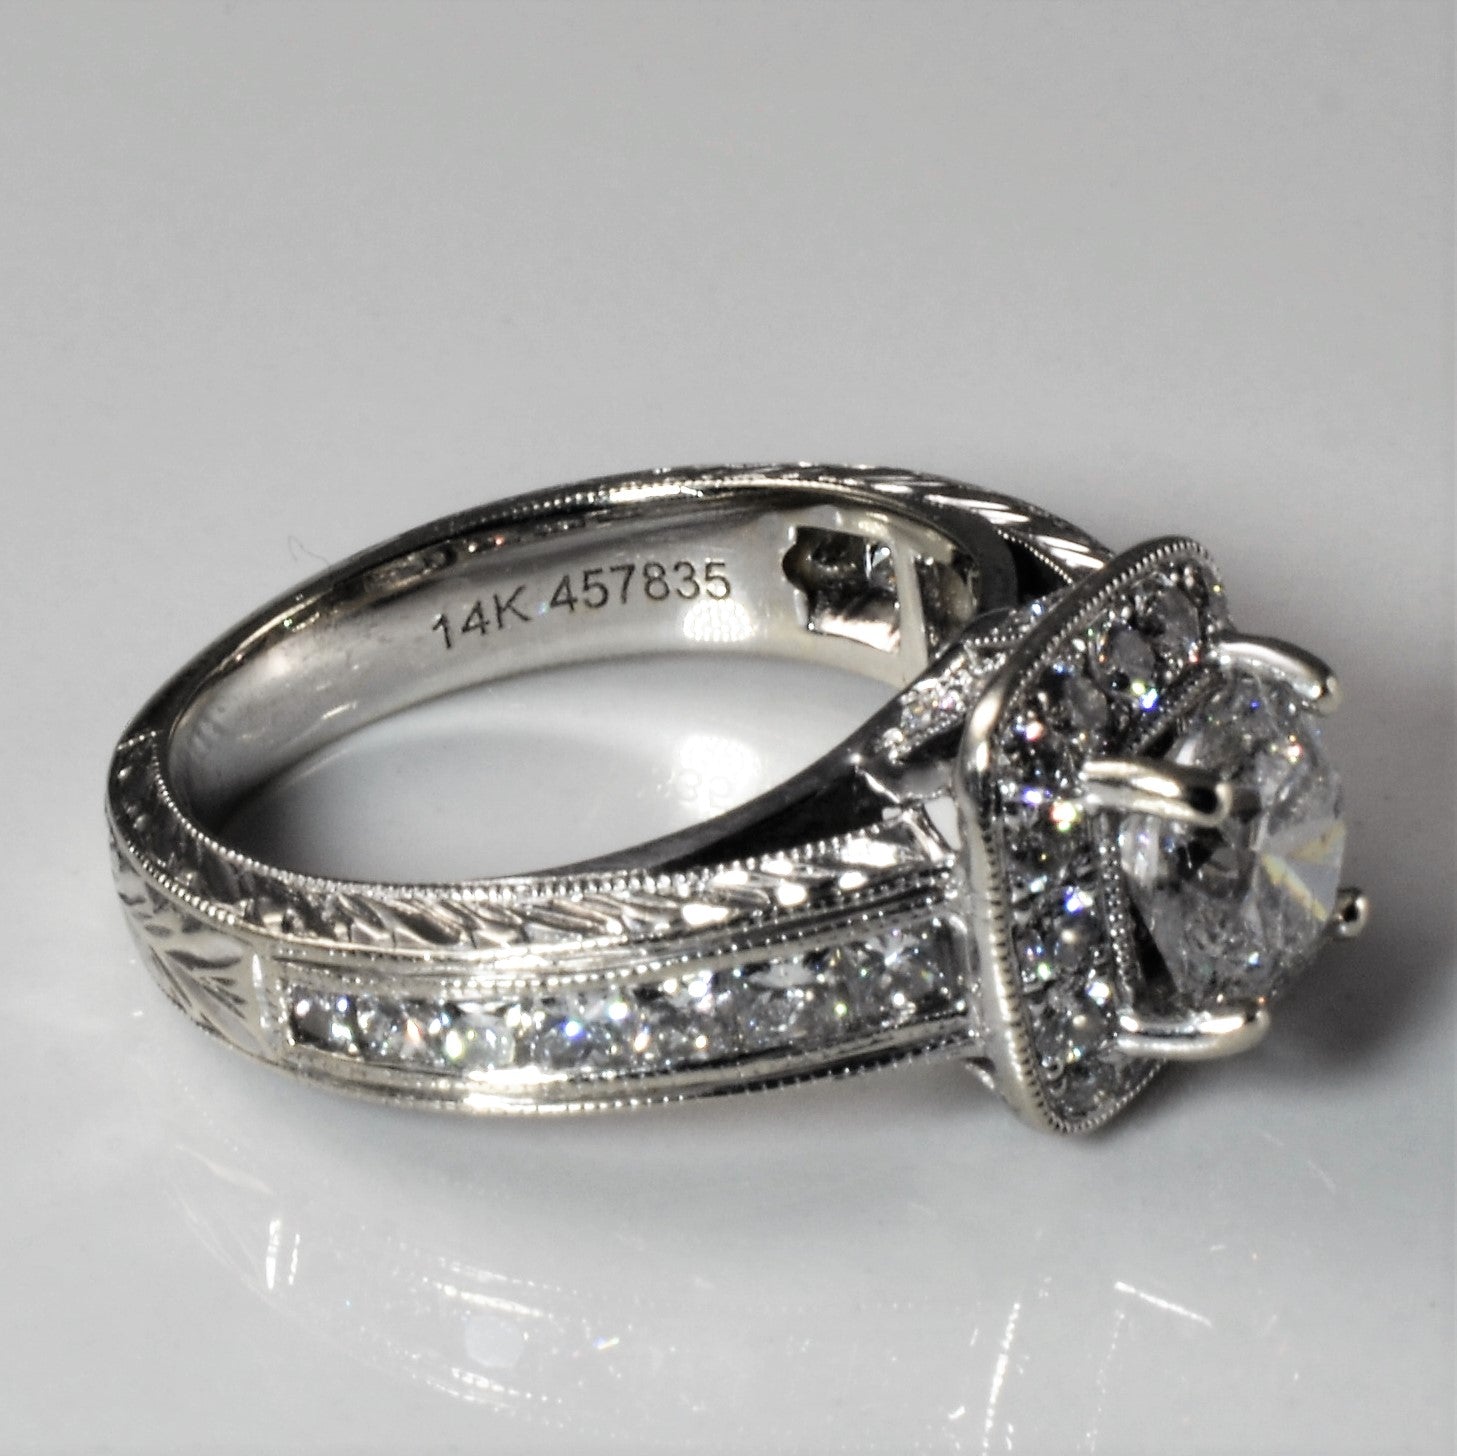 'Gabriel & Co.' Vintage Inspired Cushion Halo Engagement Ring | 2.00ctw | SZ 5 |